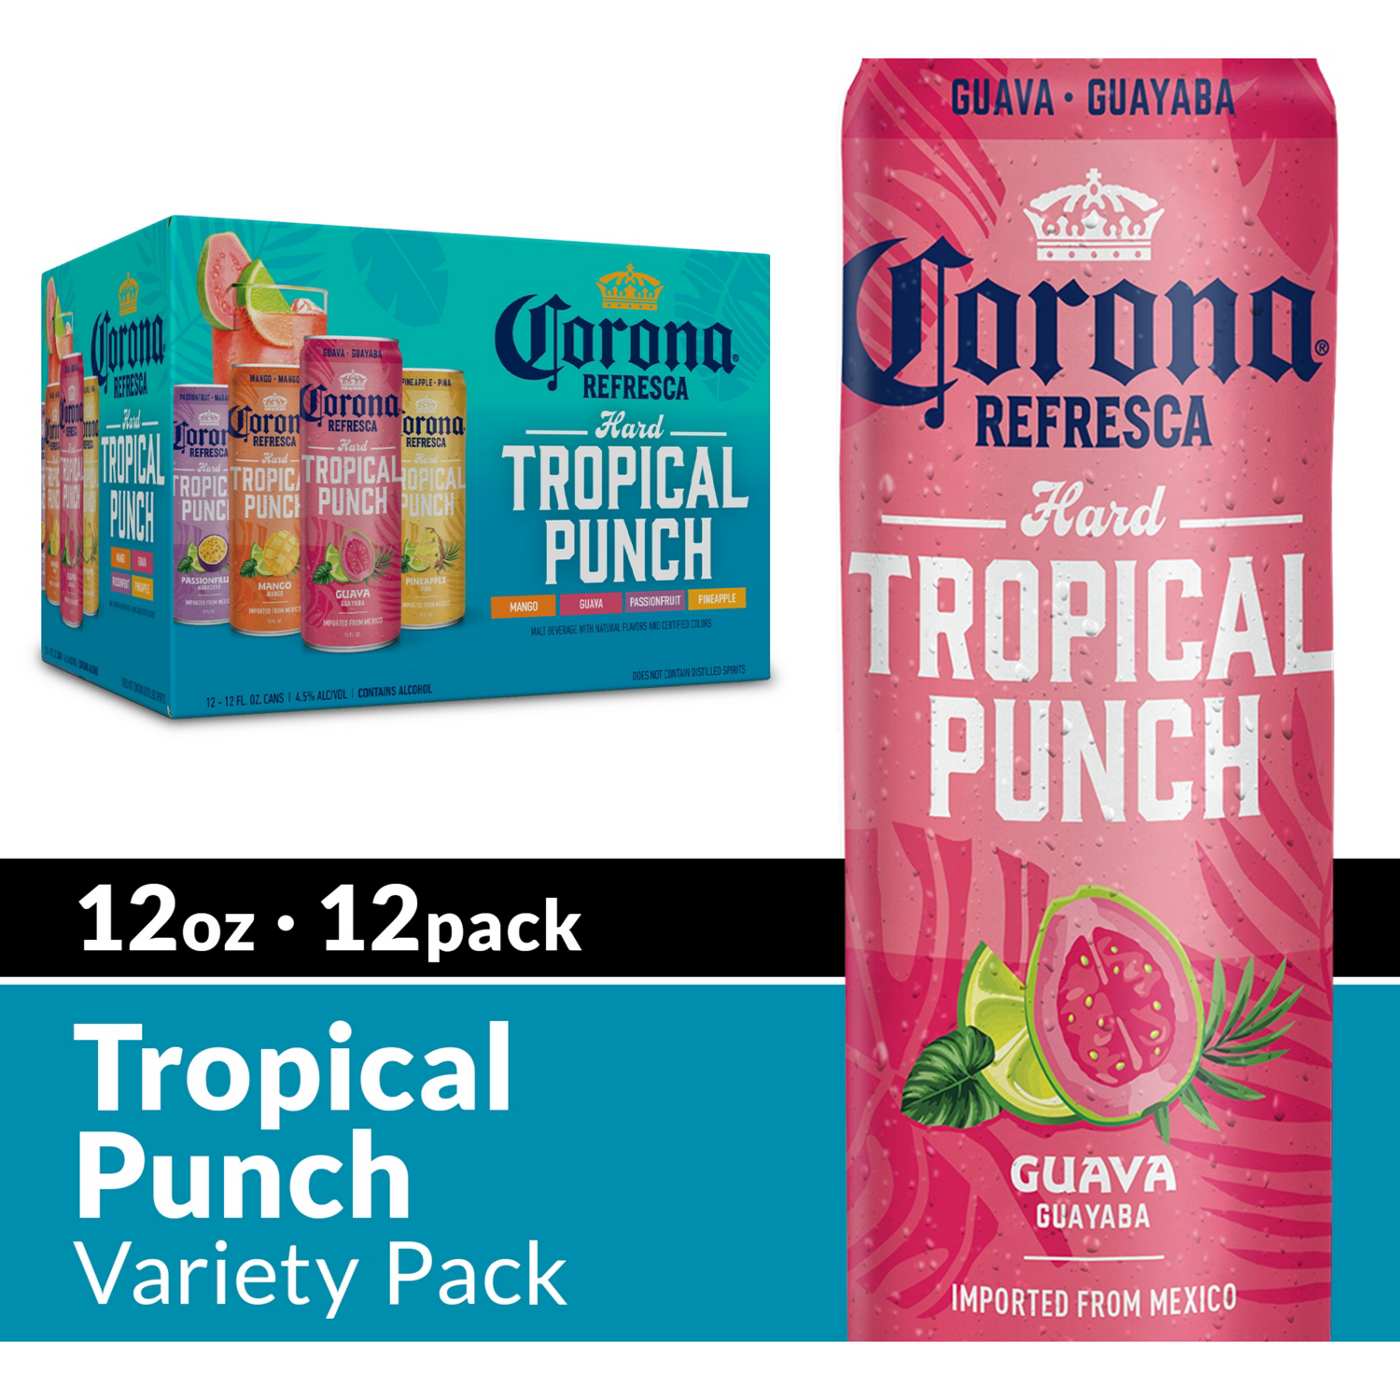 Corona Refresca Hard Tropical Punch Variety Pack 12 oz Cans, 12 pk; image 4 of 10